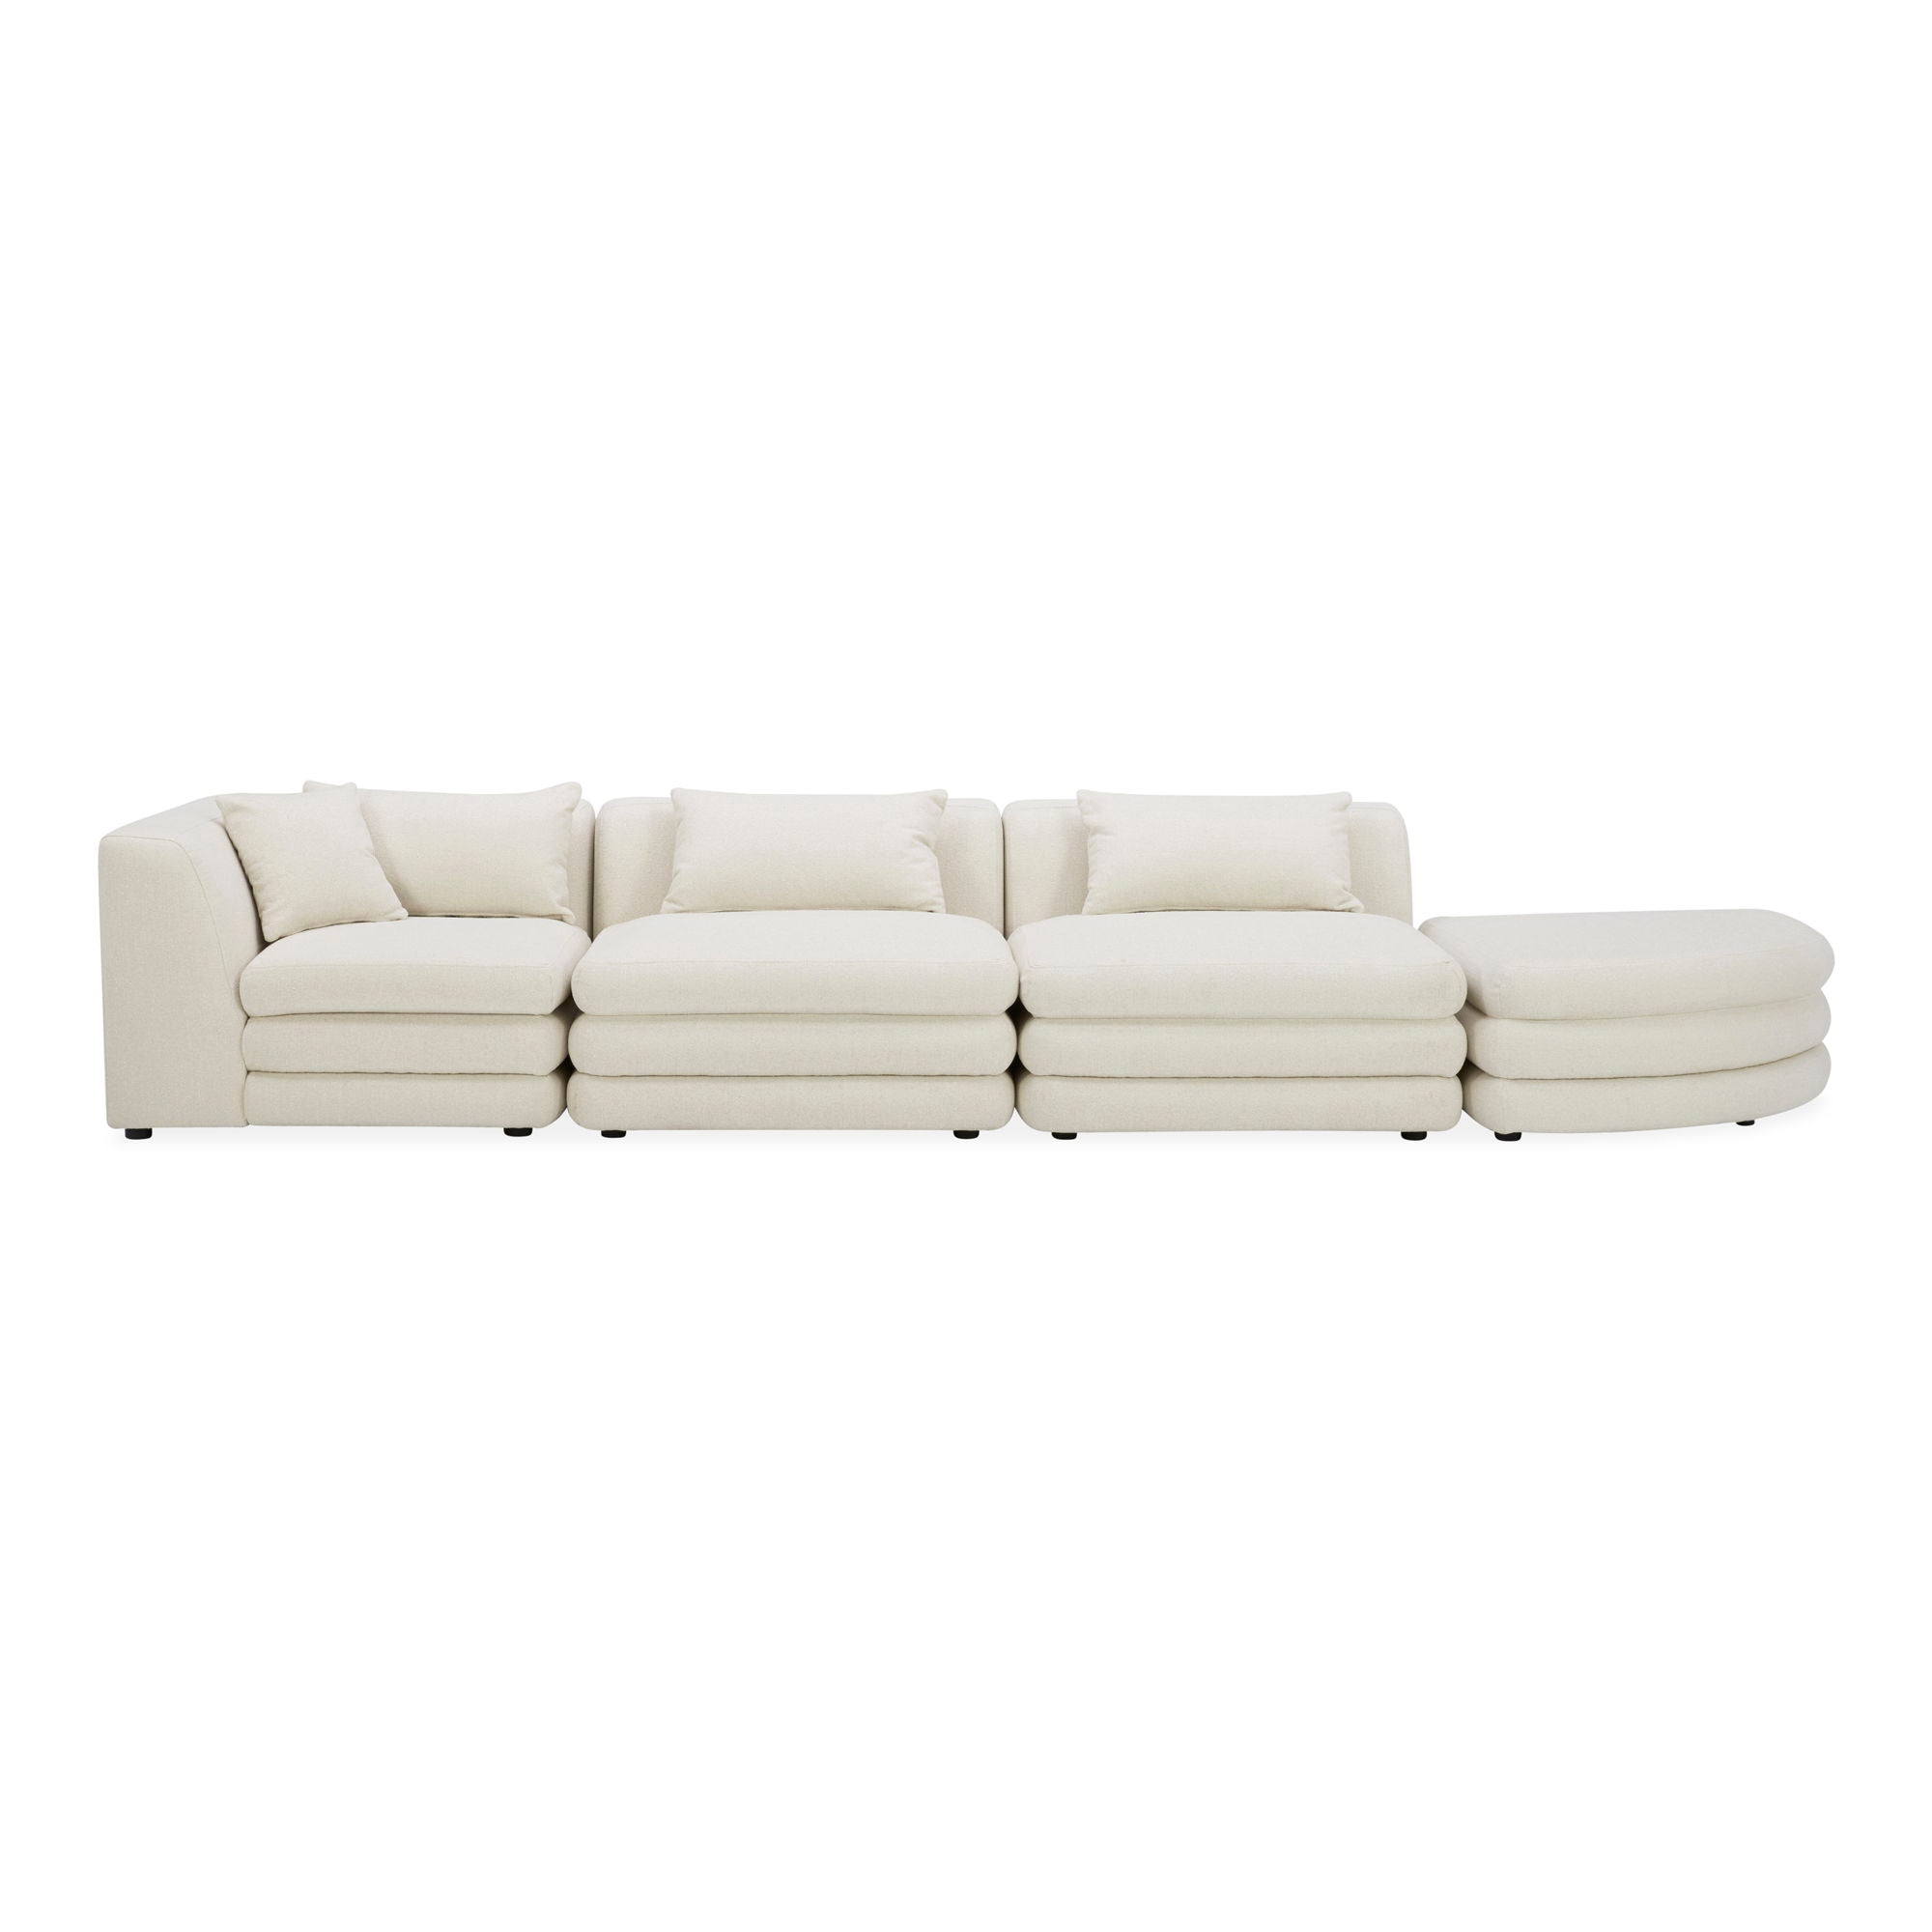 Lowtide - Linear Modular Sectional - Warm White-Stationary Sectionals-American Furniture Outlet